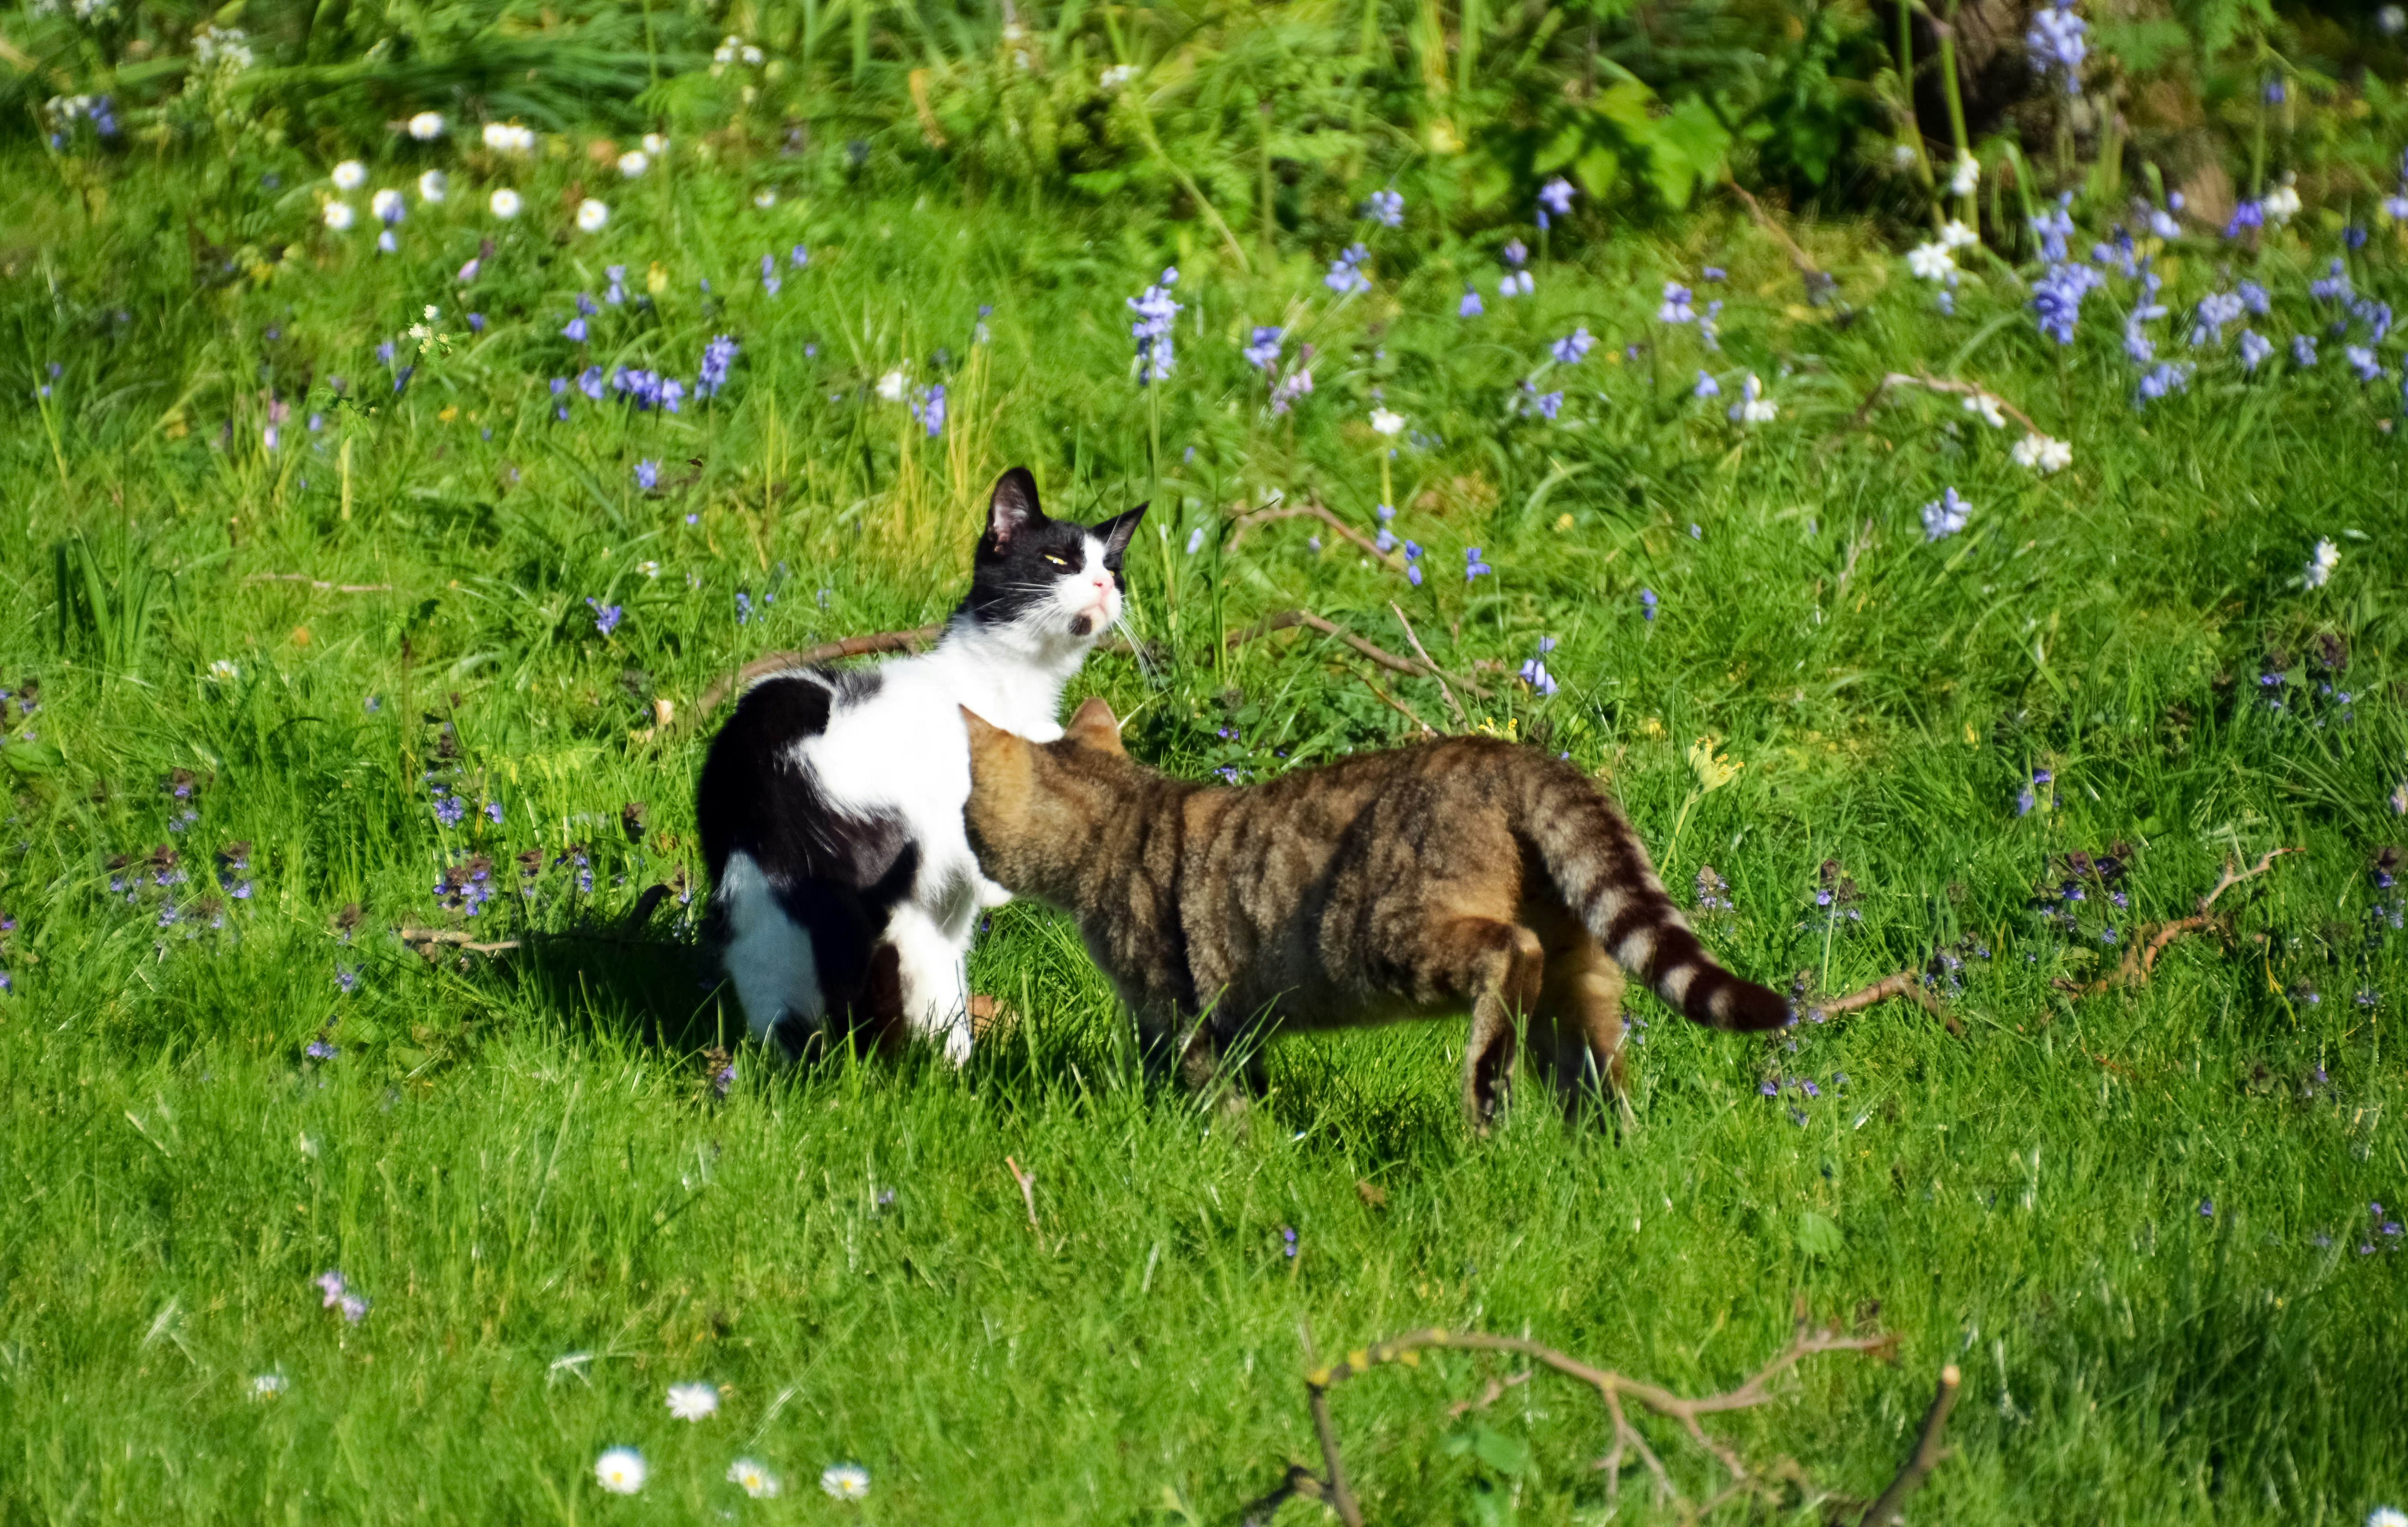 brown and white cat on green grass field during daytime